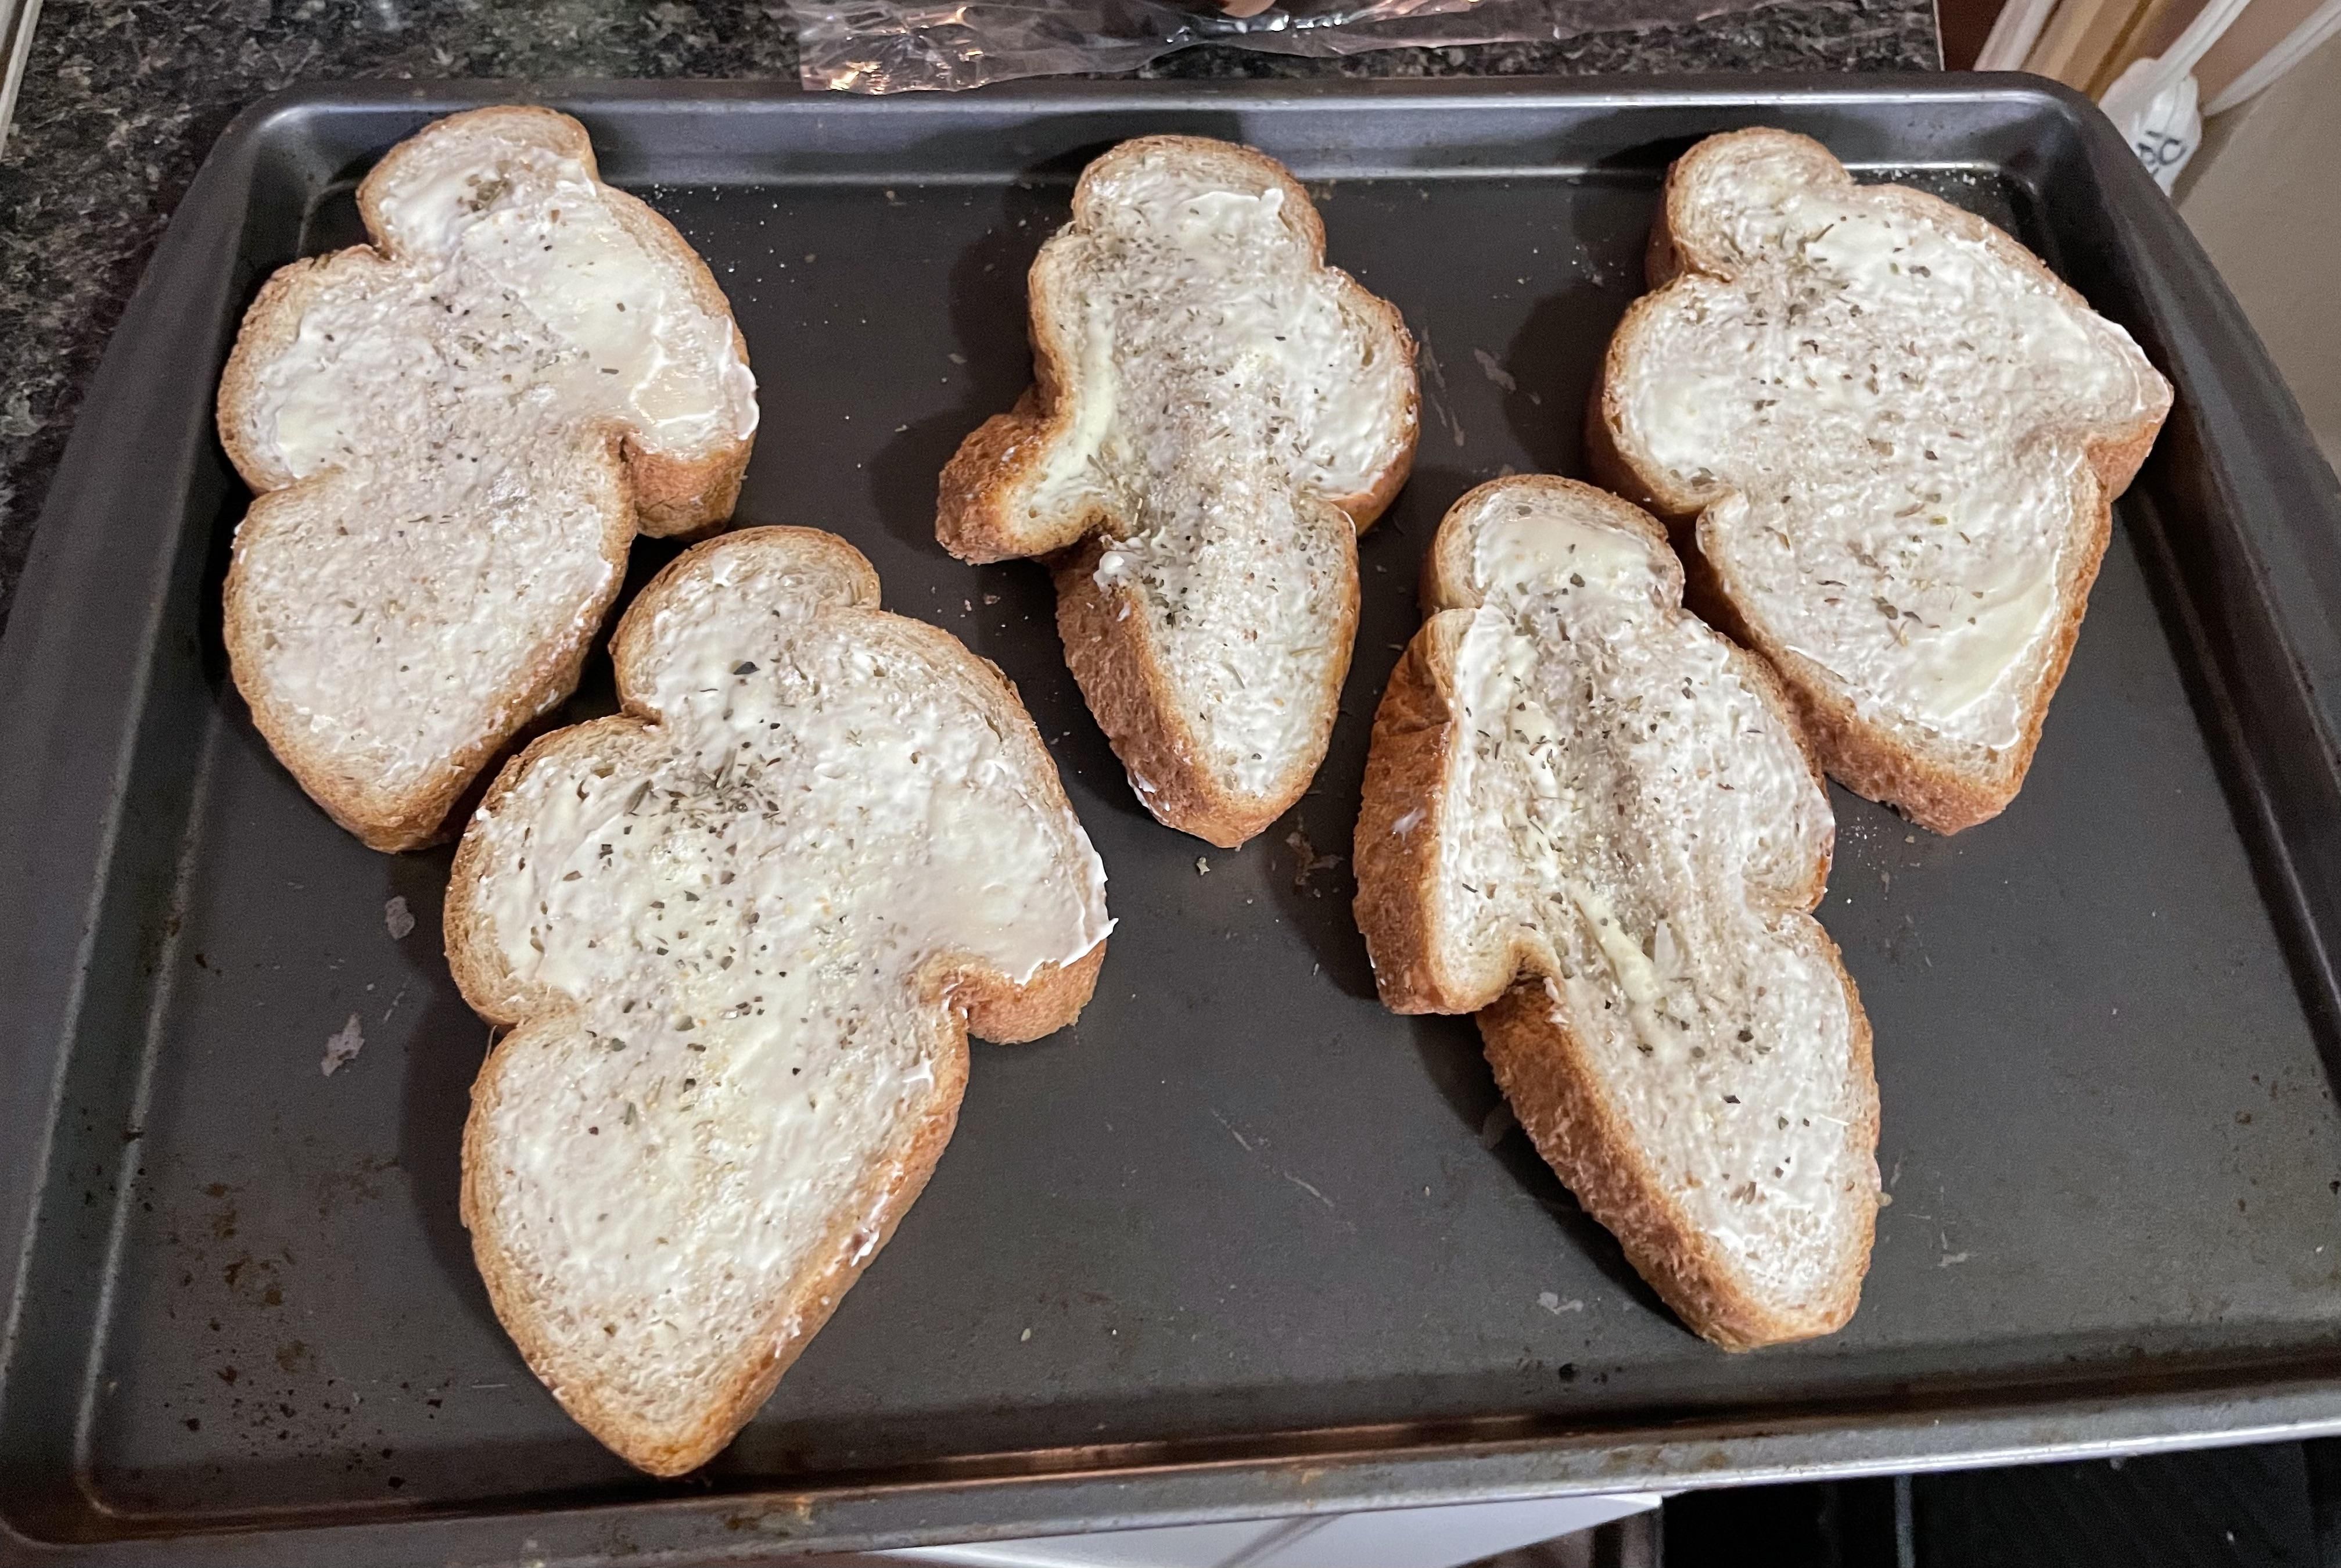 Bread got squished on the way home from the store. Now we are having Garlic Ghosts :)